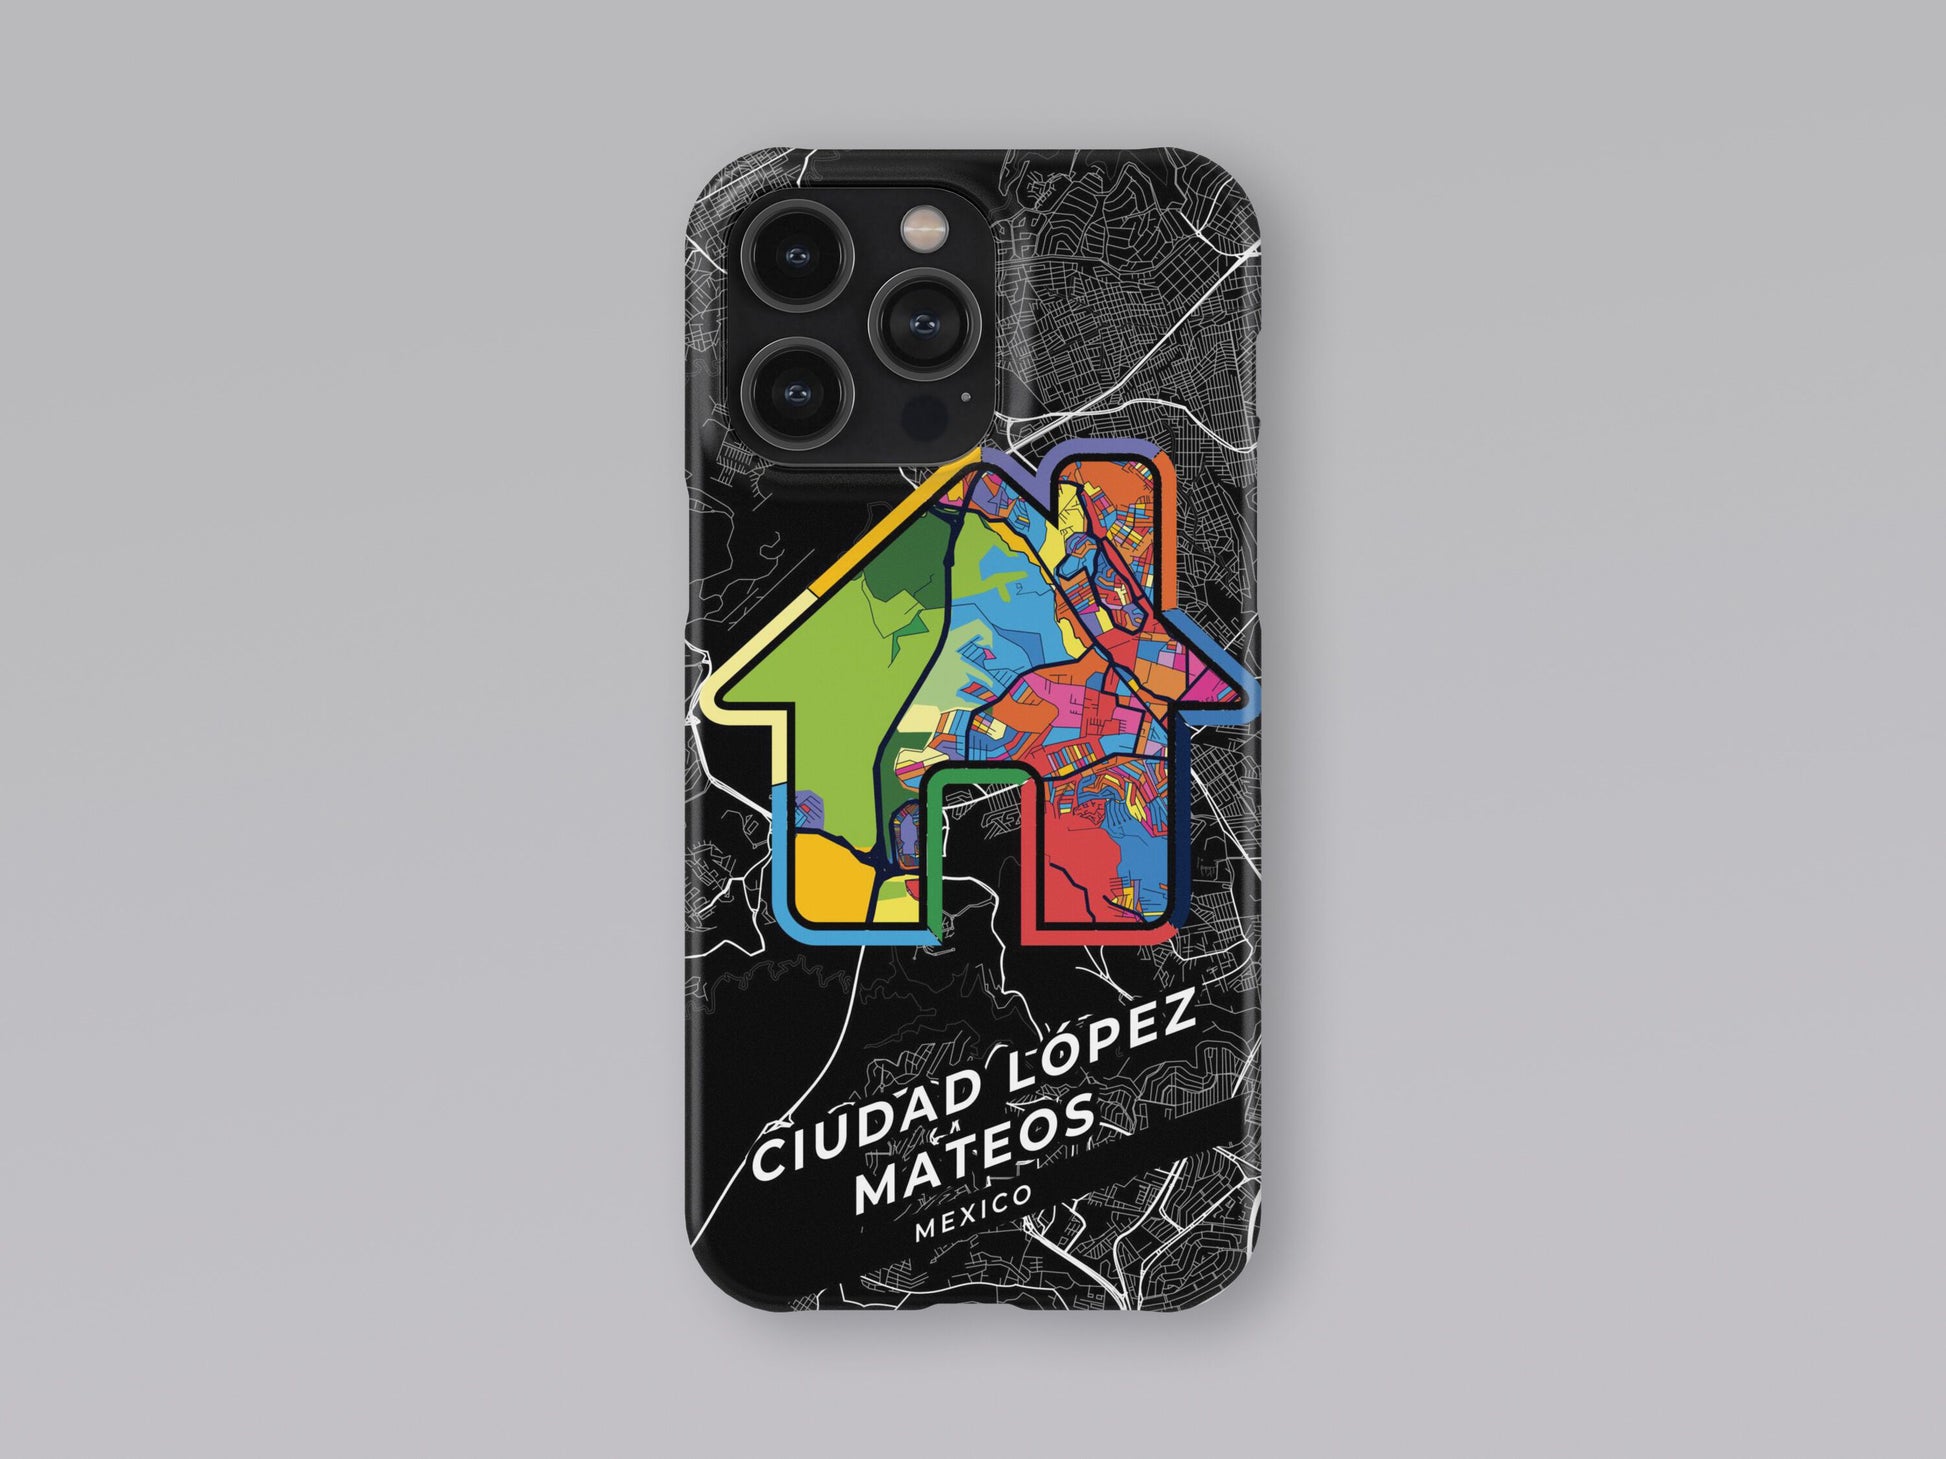 Ciudad López Mateos Mexico slim phone case with colorful icon. Birthday, wedding or housewarming gift. Couple match cases. 3